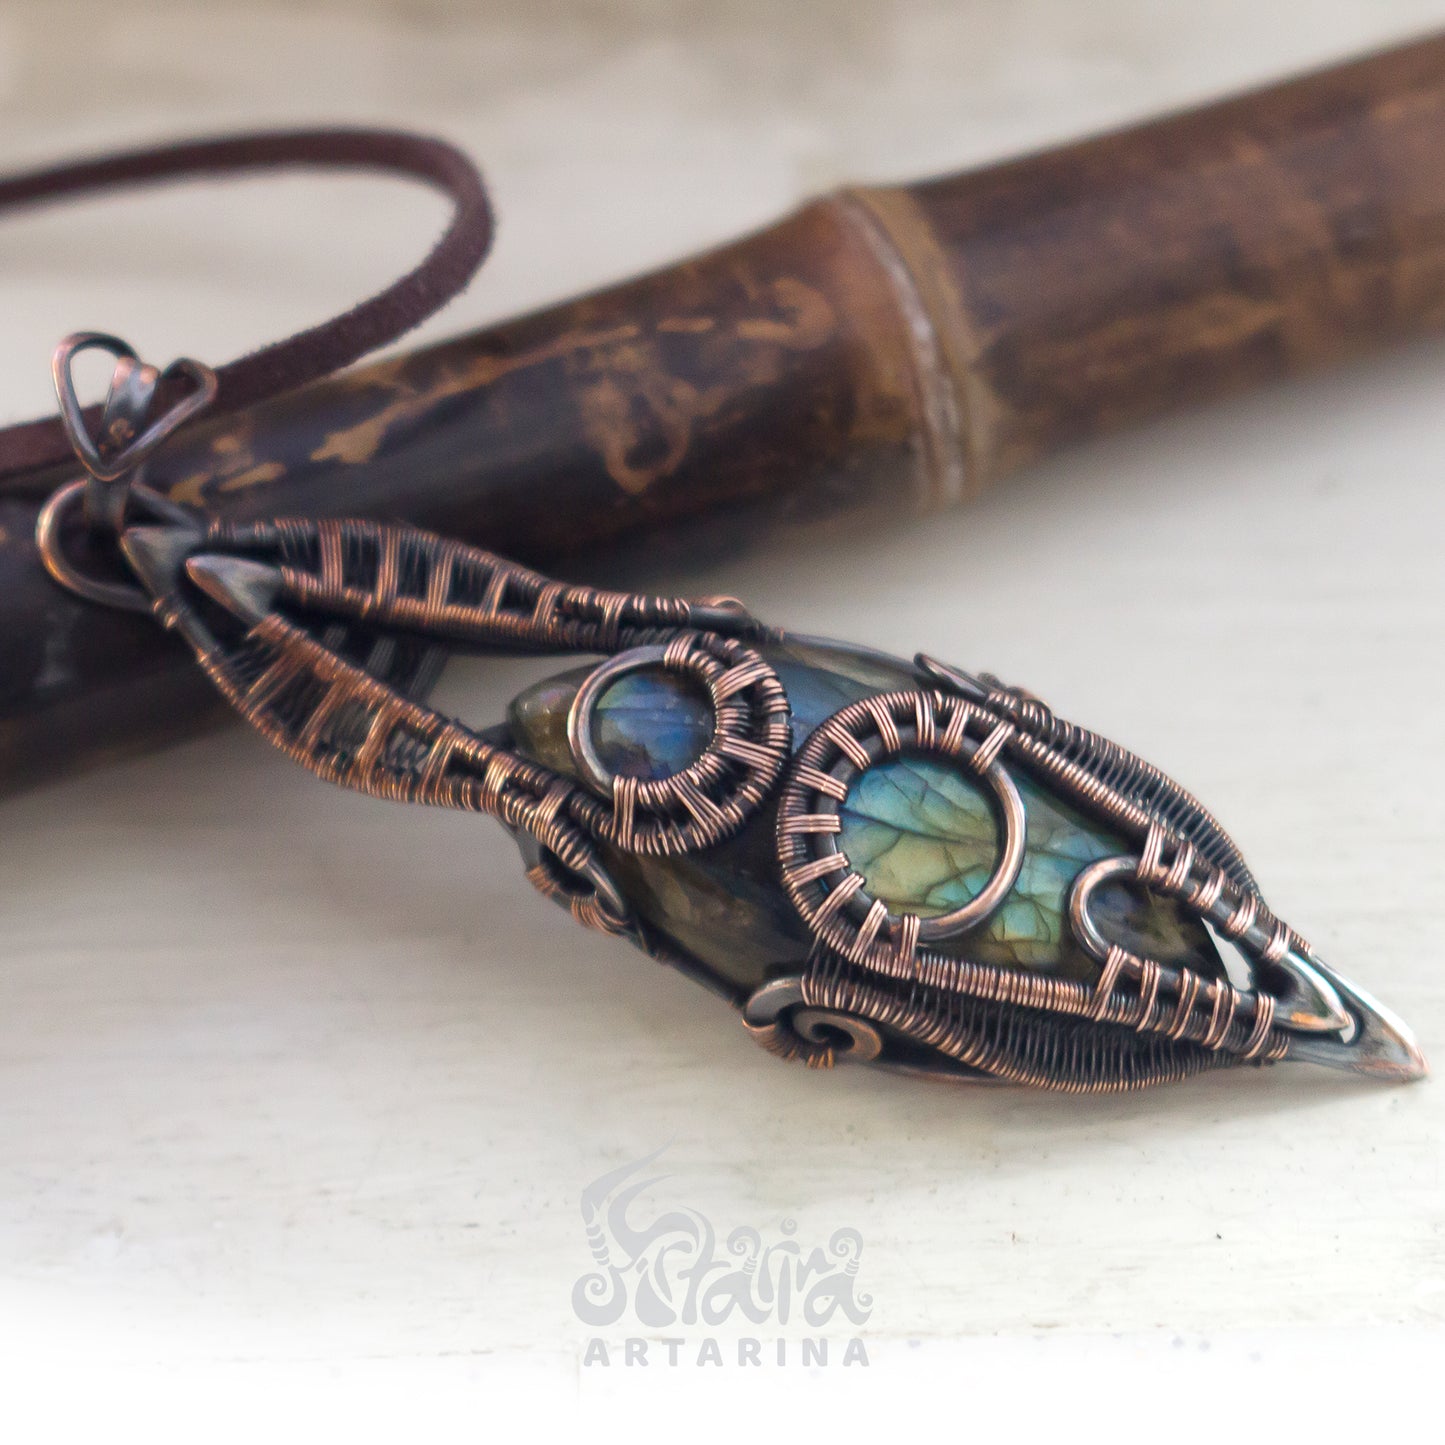 Long wire wrapped necklace pendant with labradorite